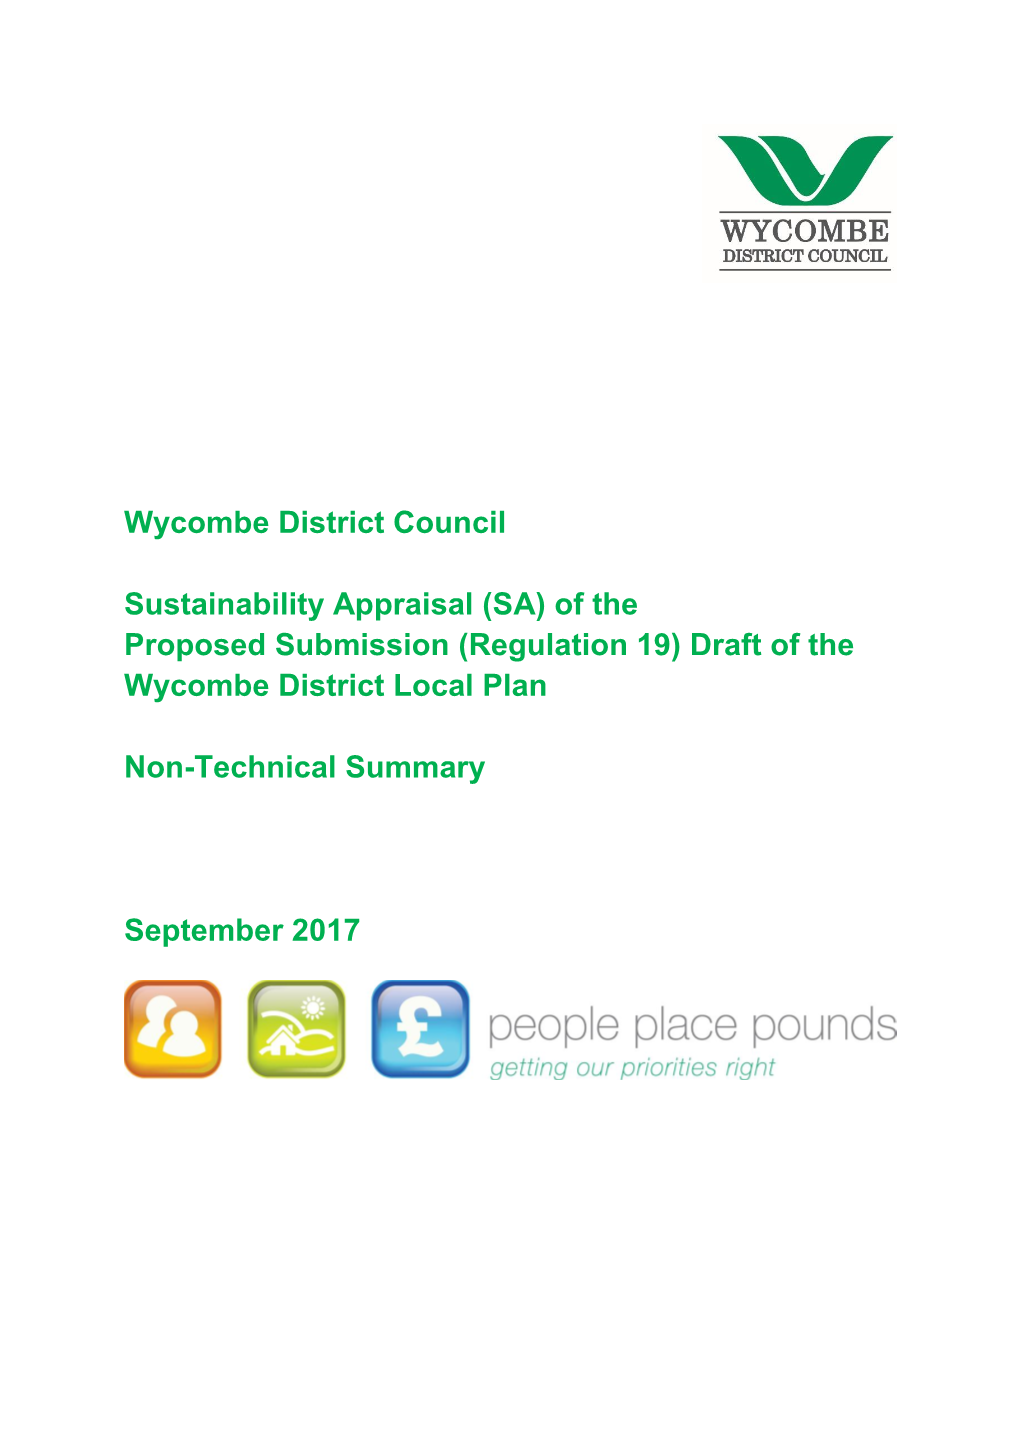 Sustainability Appraisal (SA) of the Proposed Submission (Regulation 19) Draft of the Wycombe District Local Plan